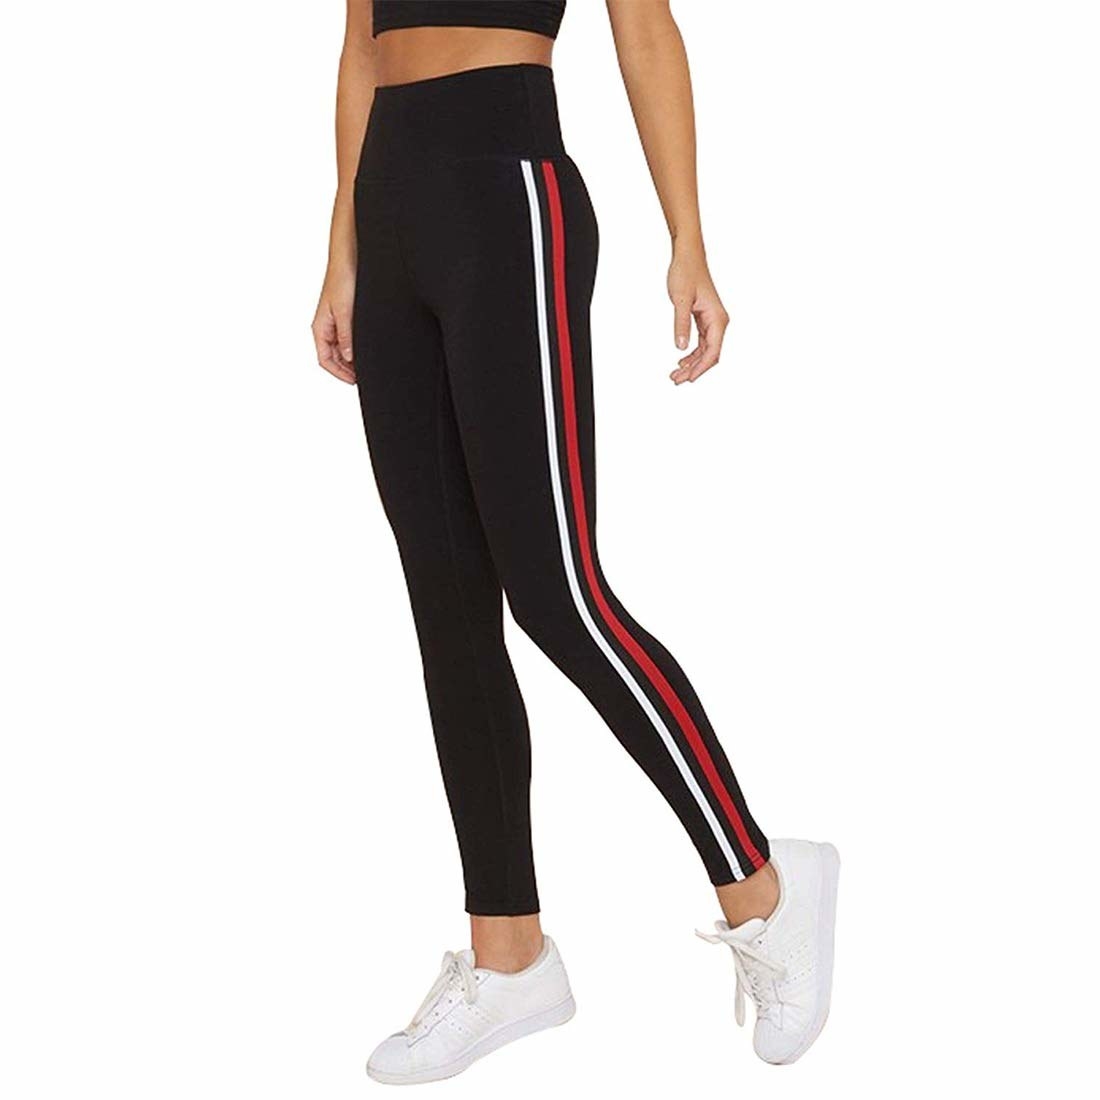 A woman wearing striped stretchy pants with a crop top and shoes